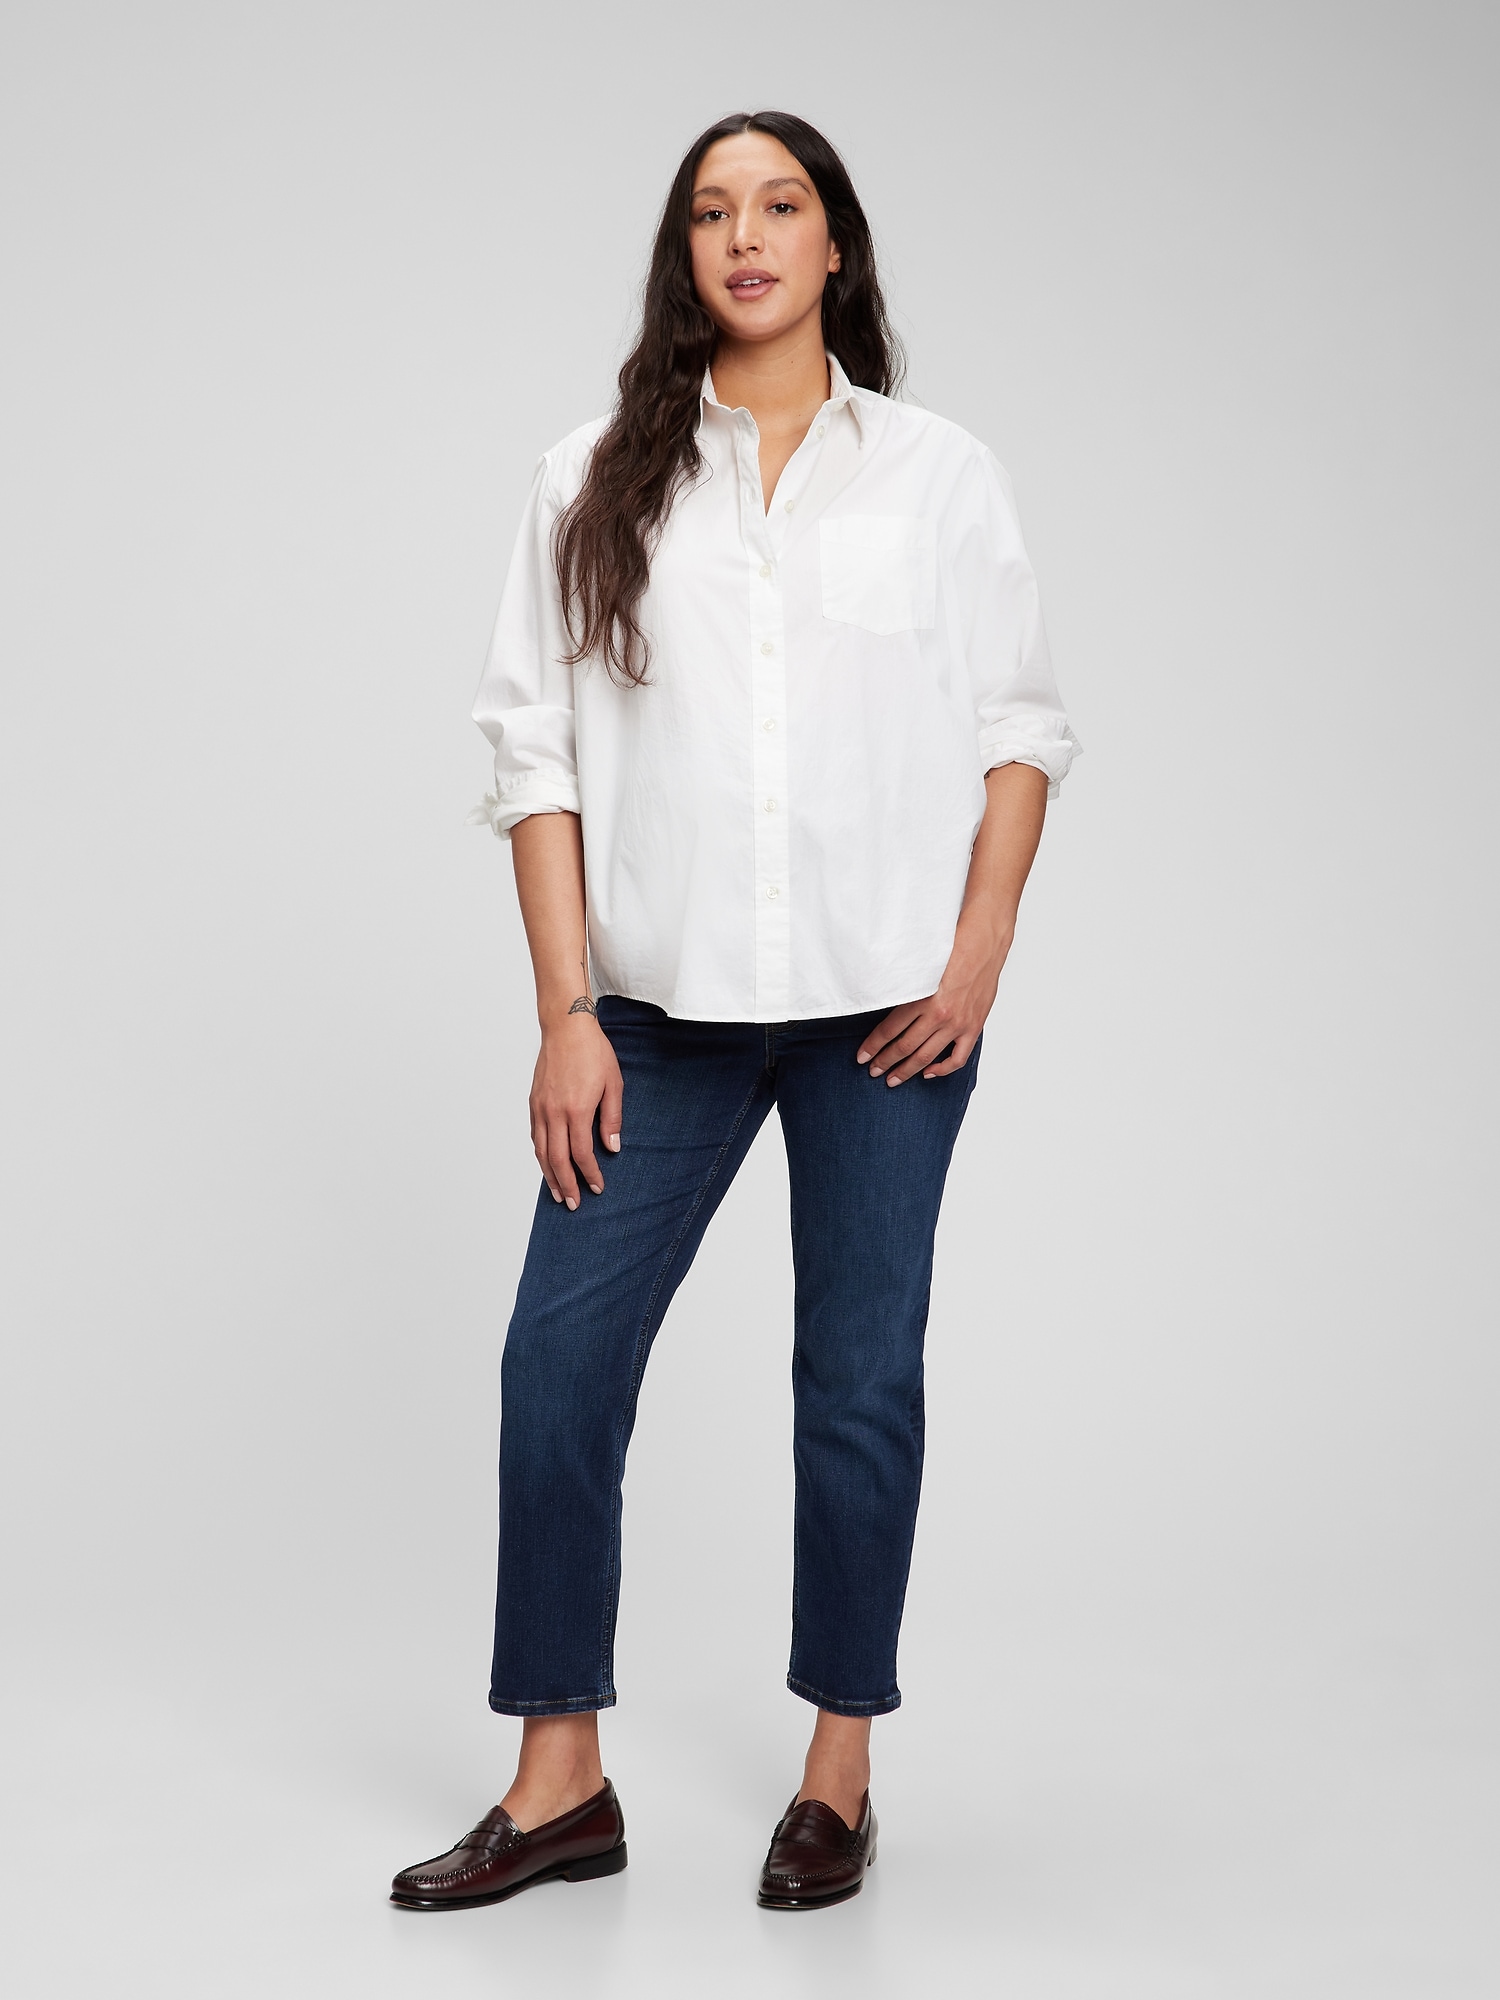 Gap Maternity True Waistband Full Panel Cheeky Straight Jeans with Washwell